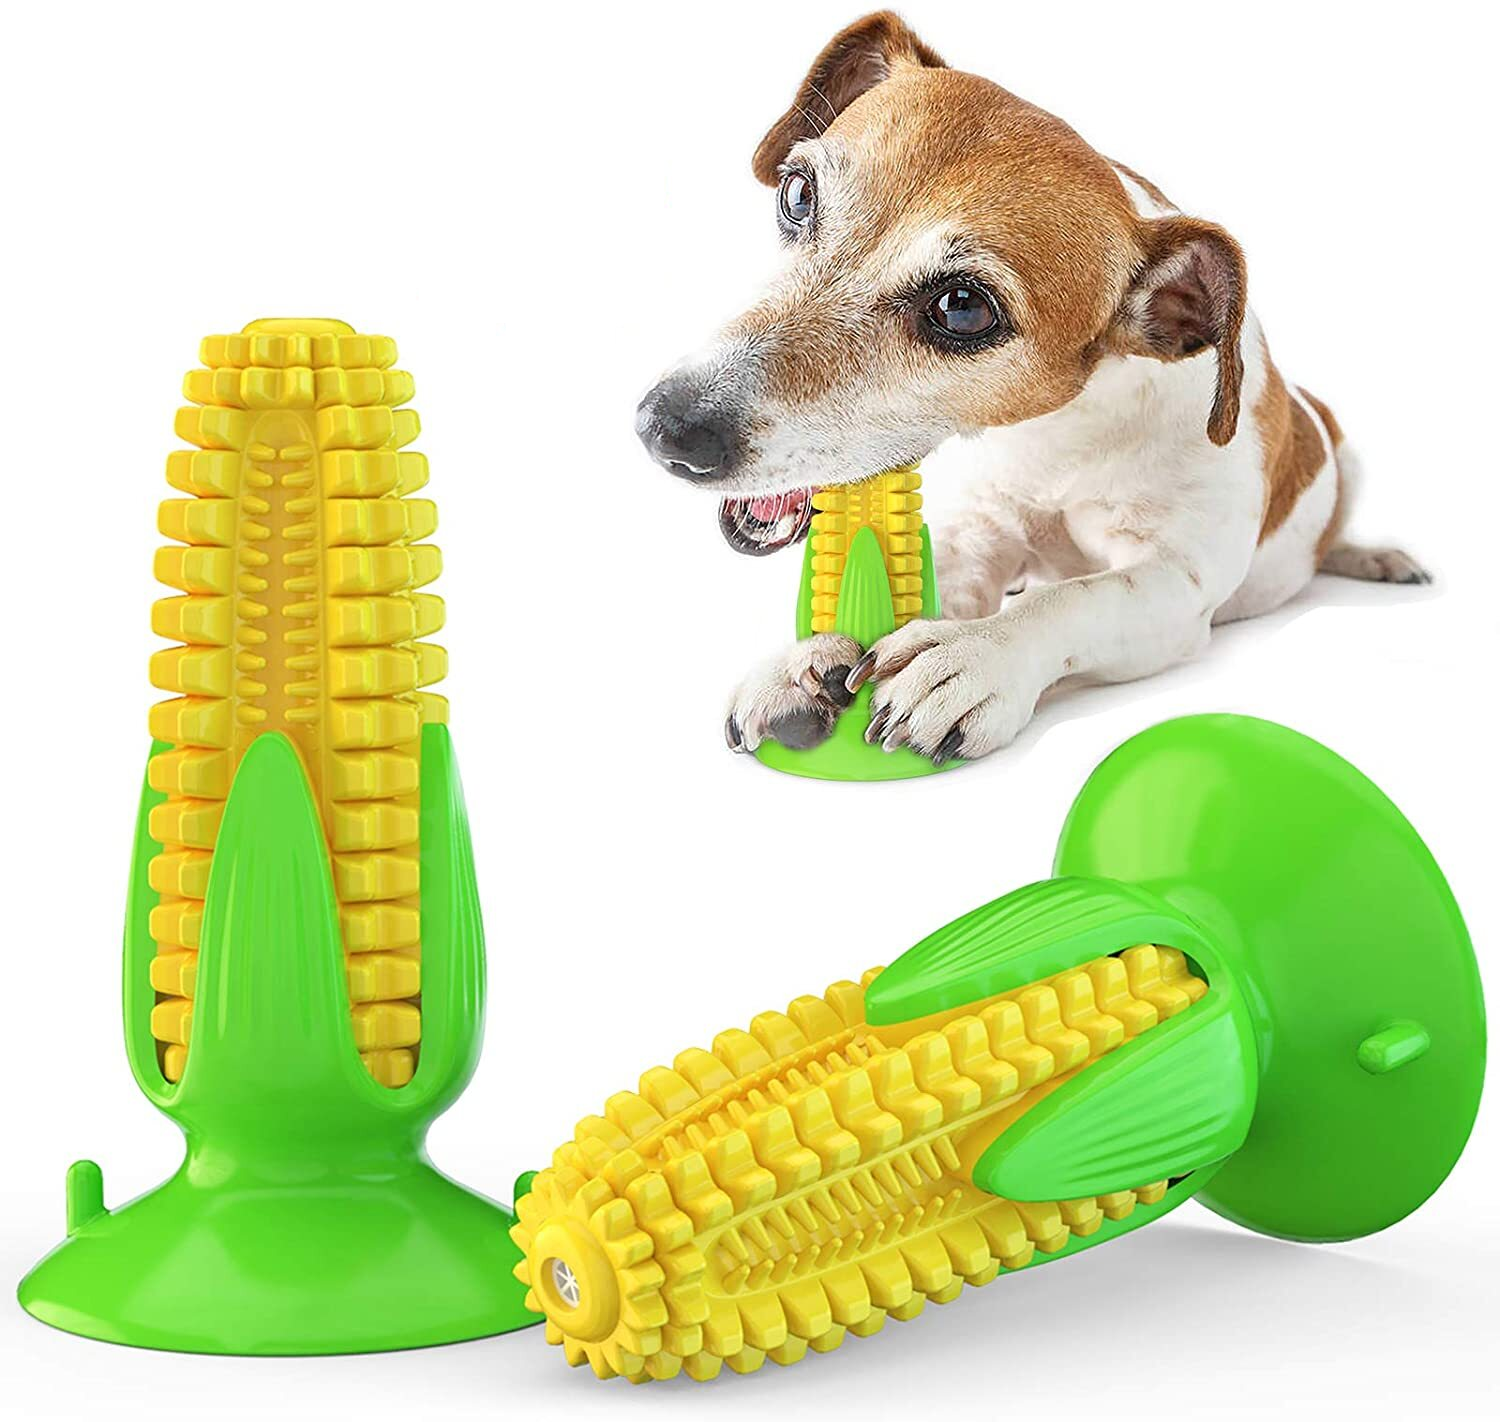 emPAWrium Dog Toothbrush Interactive TPR Squeak Chew Toy with Suction Cup Corn